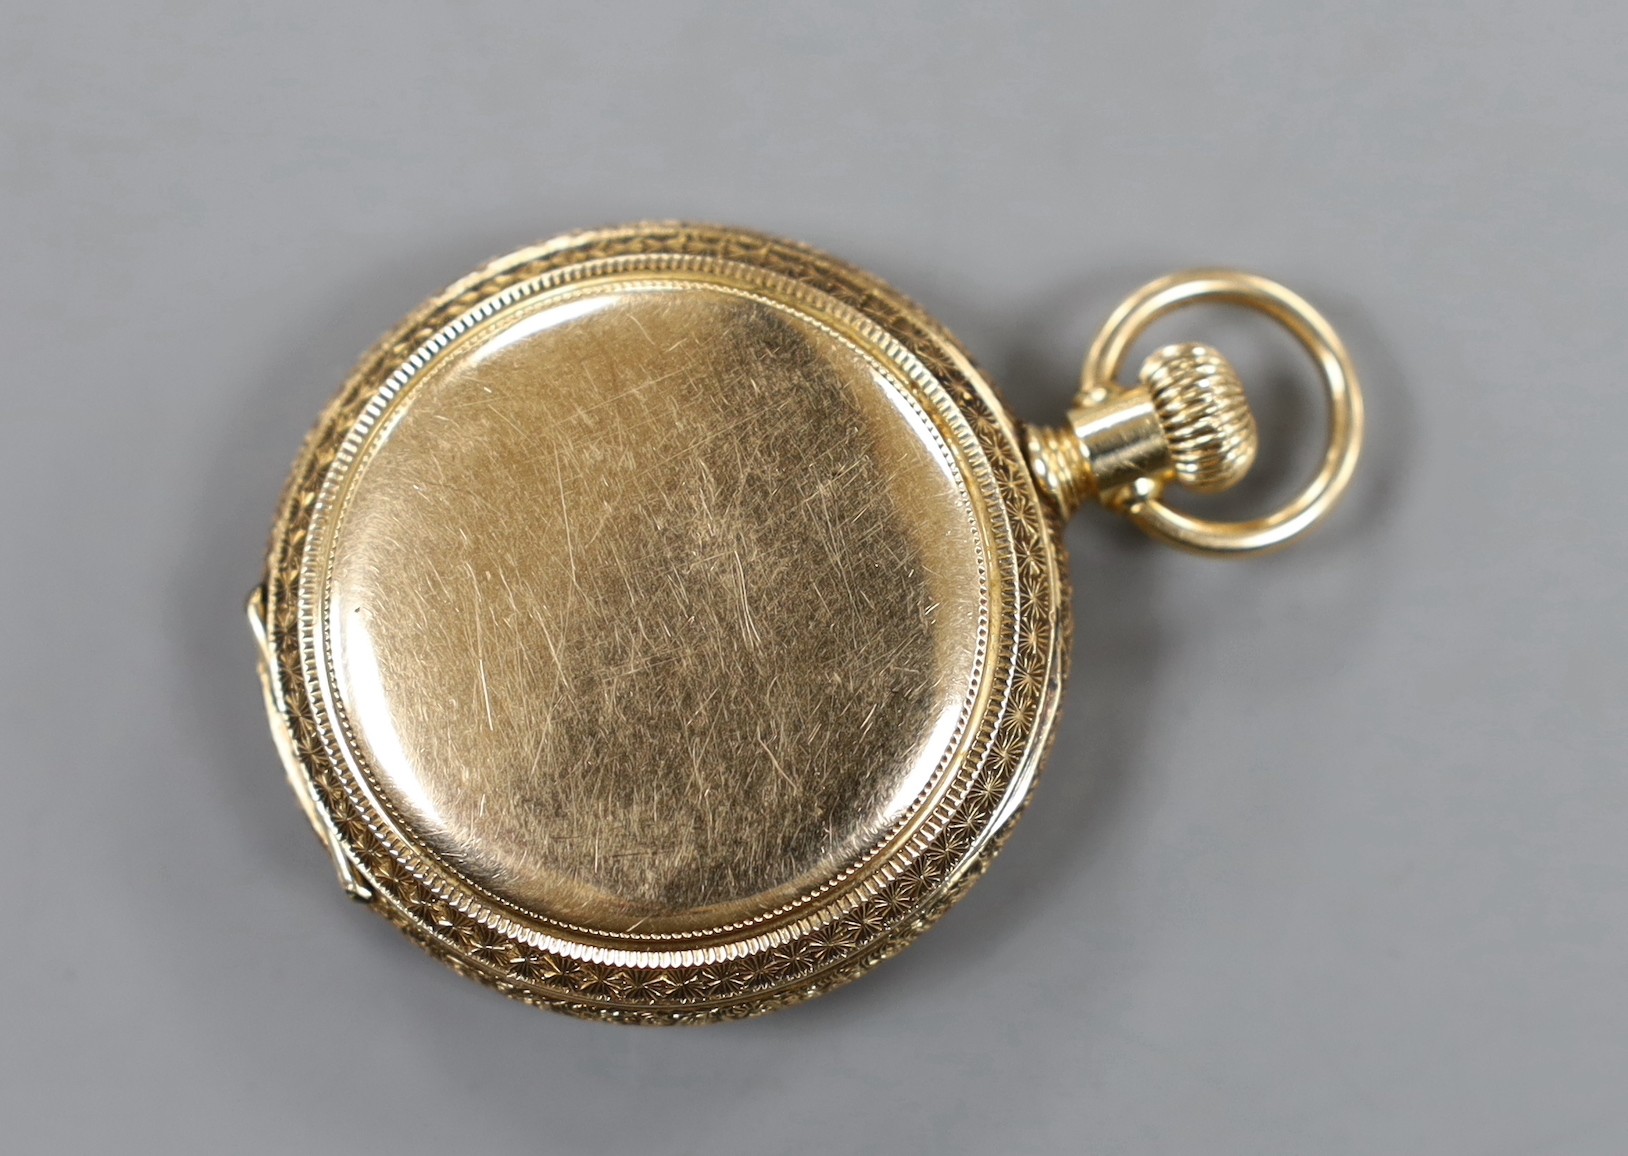 An early 20th century 14k Elgin hunter keyless fob watch, with Arabic dial and engraved monogram